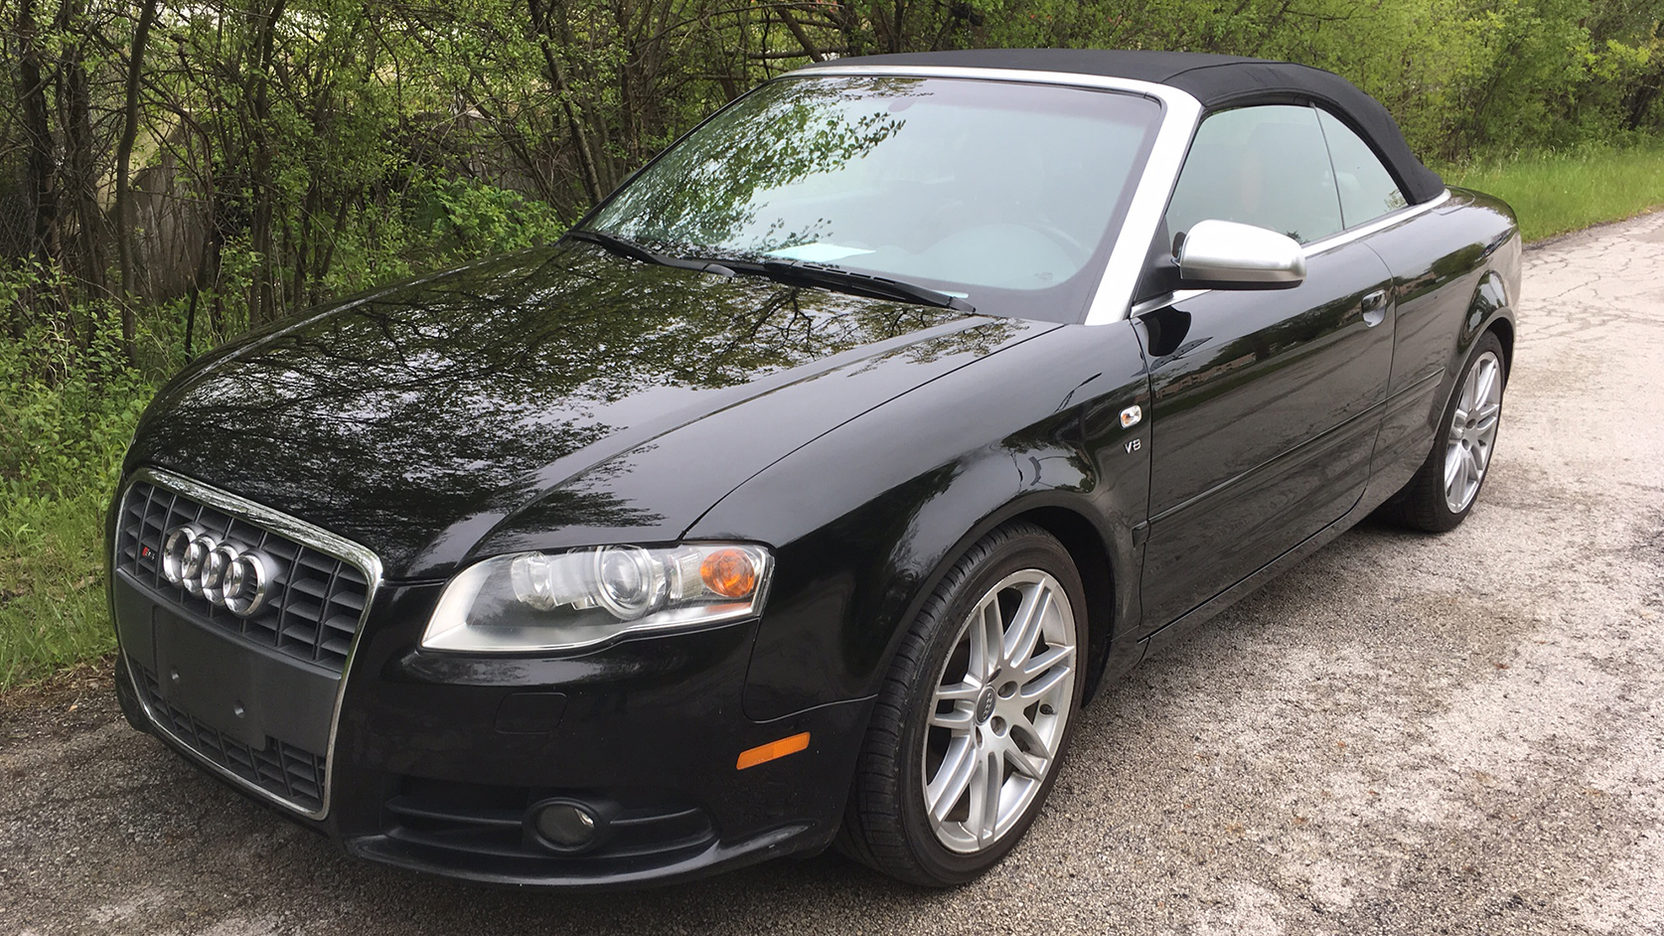 2008 Audi S4 Convertible | W261 | Indy 2017